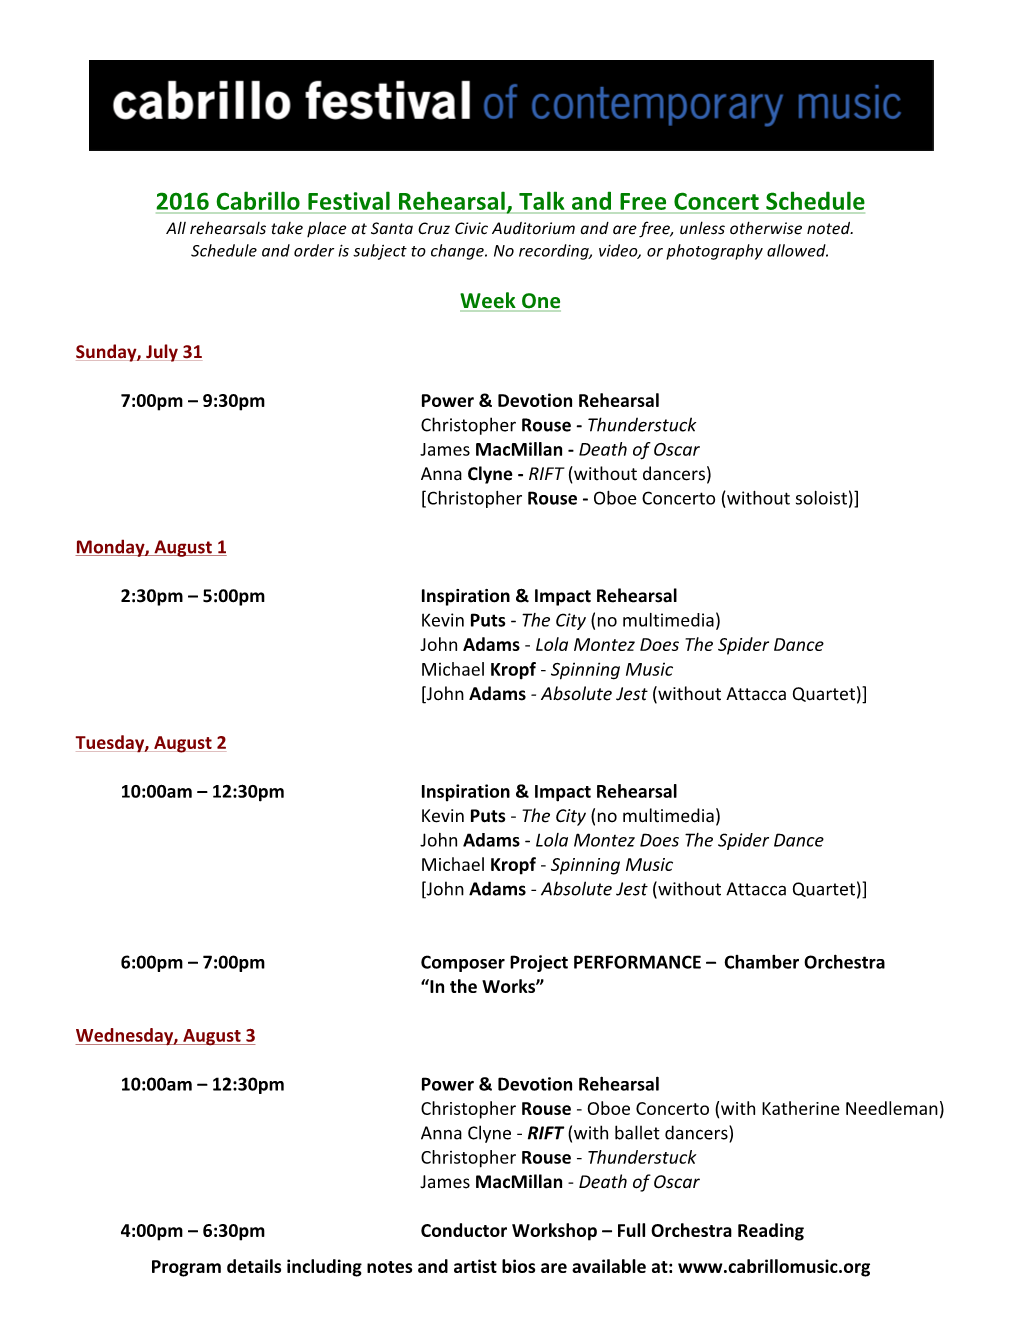 2016 Cabrillo Festival Rehearsal, Talk and Free Concert Schedule All Rehearsals Take Place at Santa Cruz Civic Auditorium and Are Free, Unless Otherwise Noted